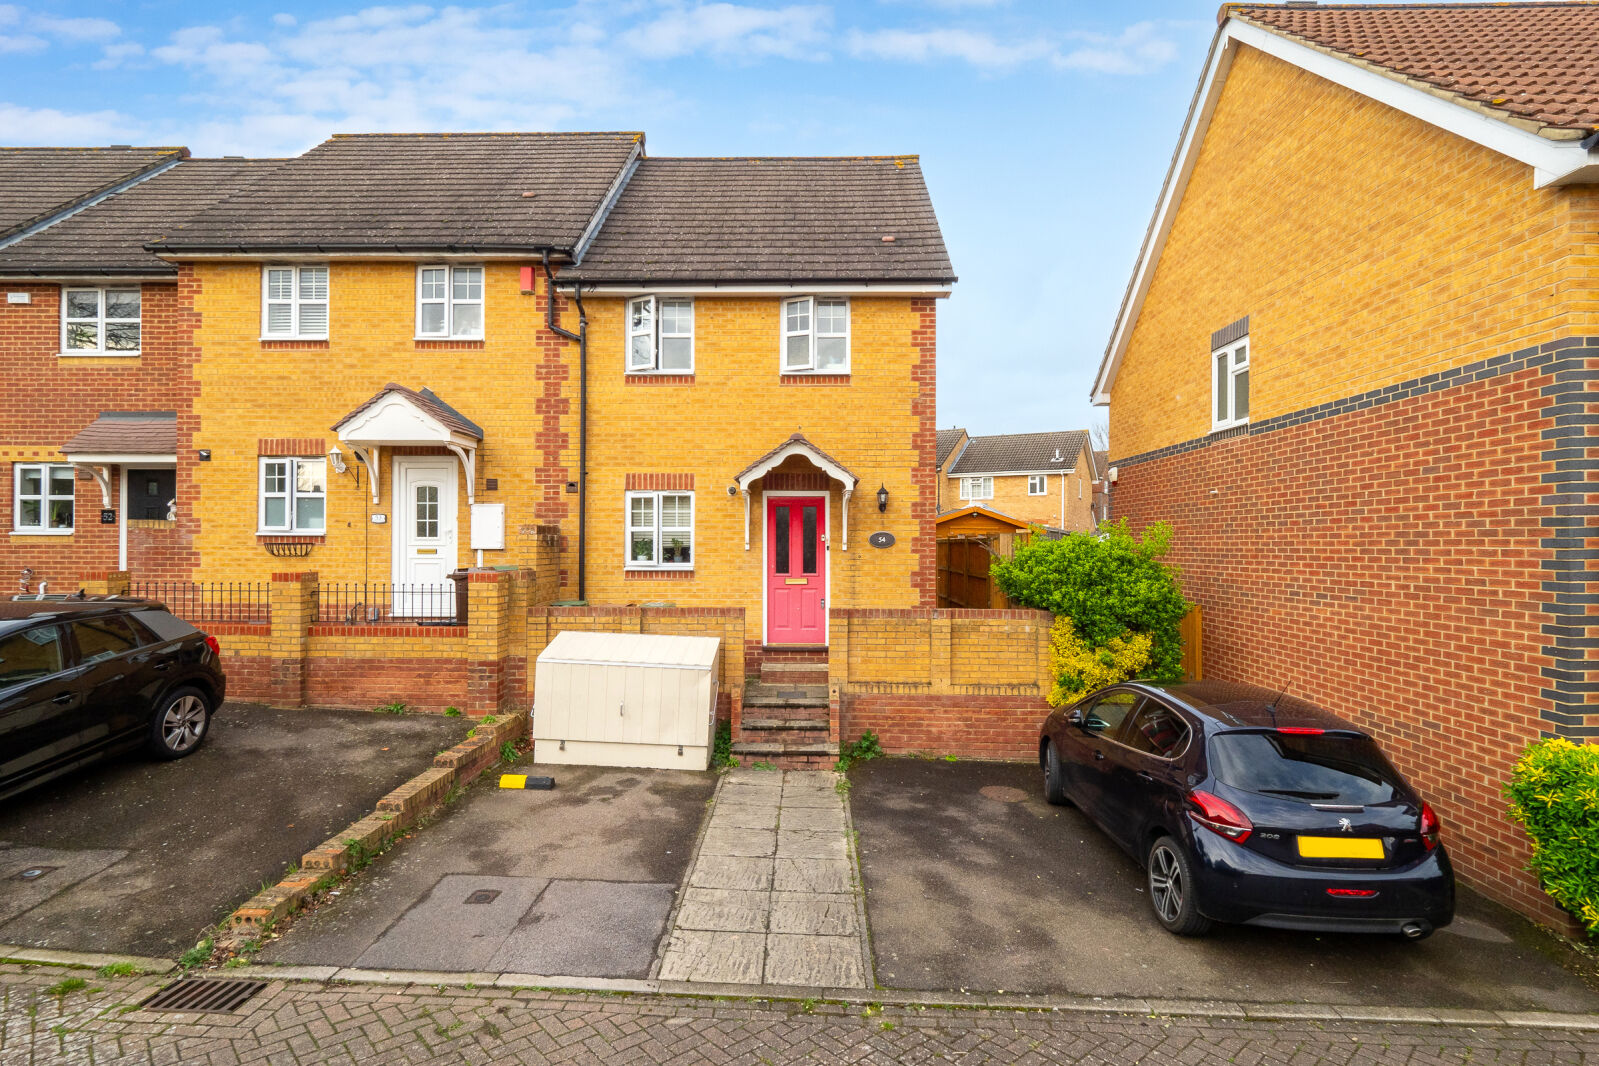 3 bedroom end terraced house for sale Bakers Gardens, Carshalton, SM5, main image